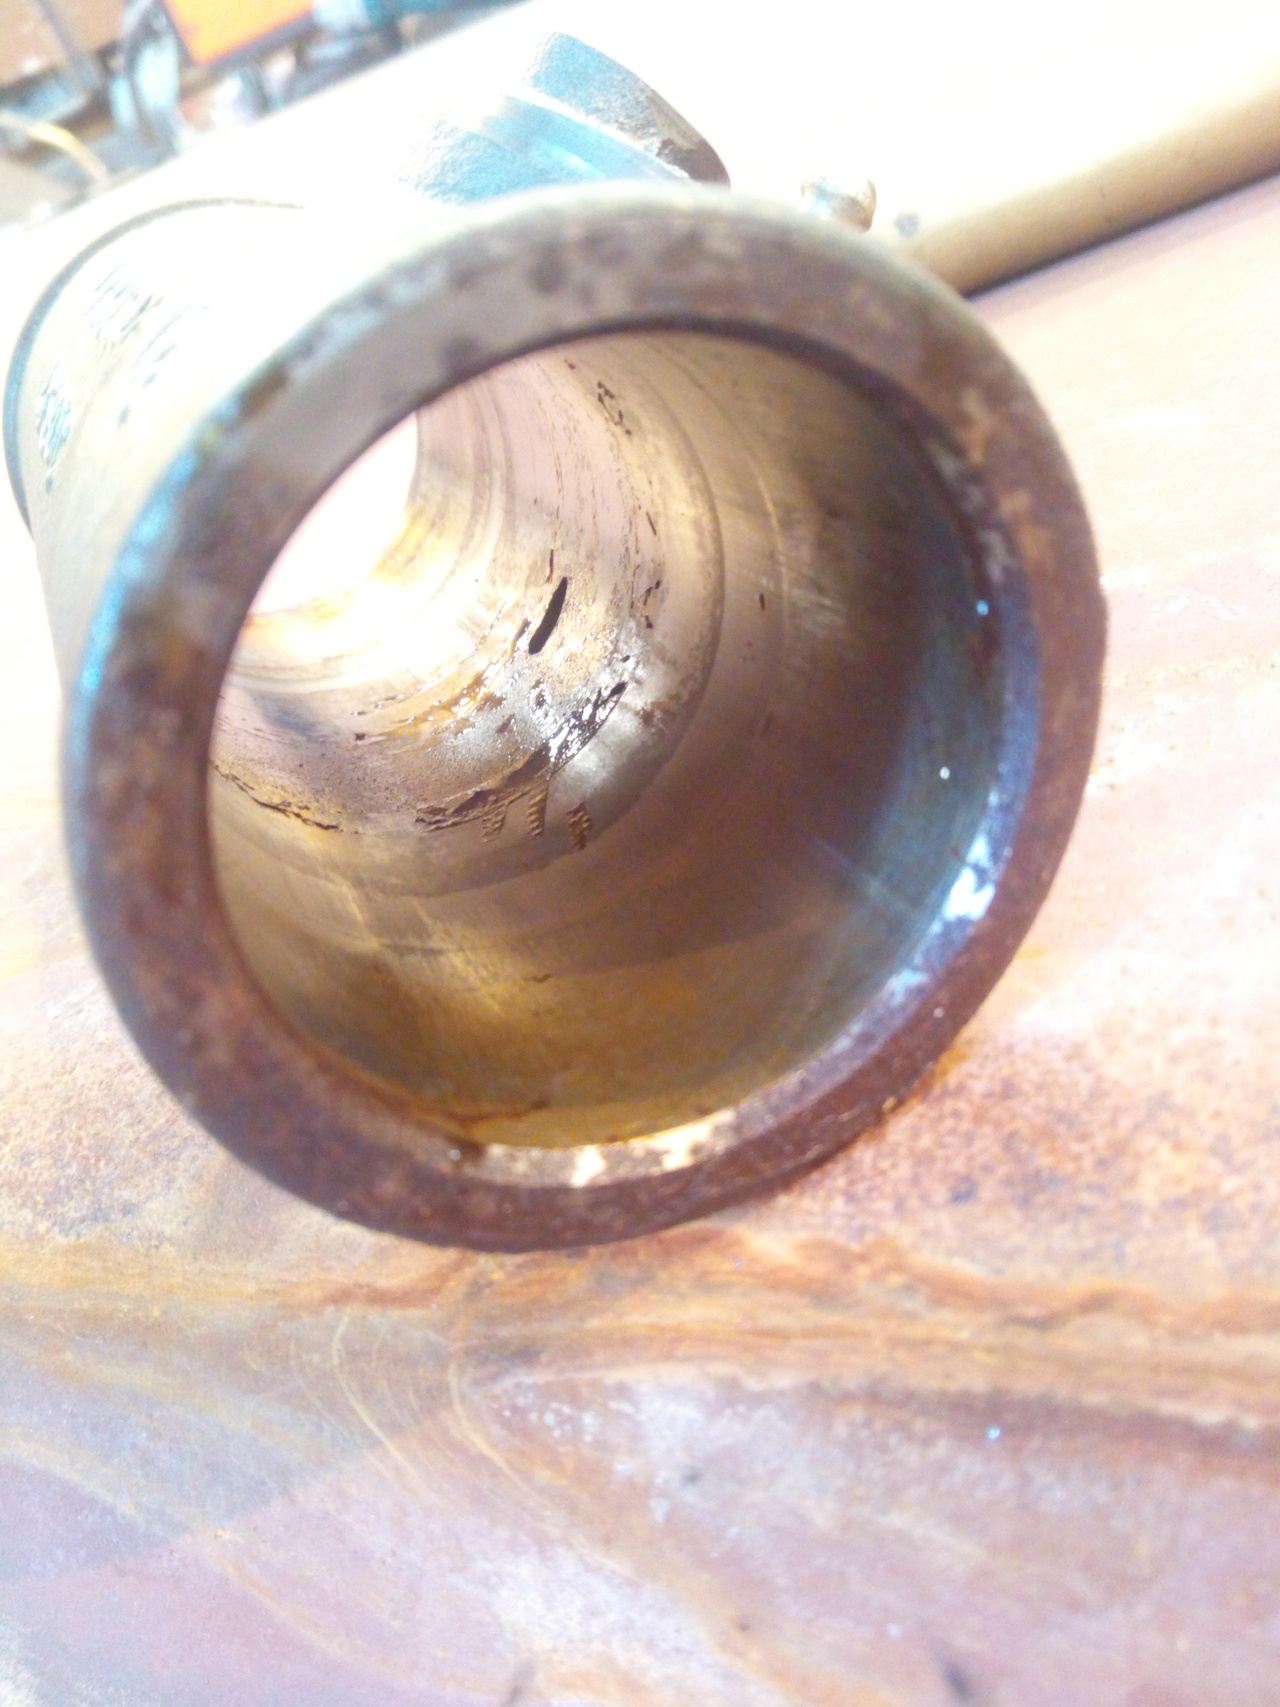 The view into the wheel cylinder, showing perfectly smooth inner
bore except for all the cosmoline protective sludge